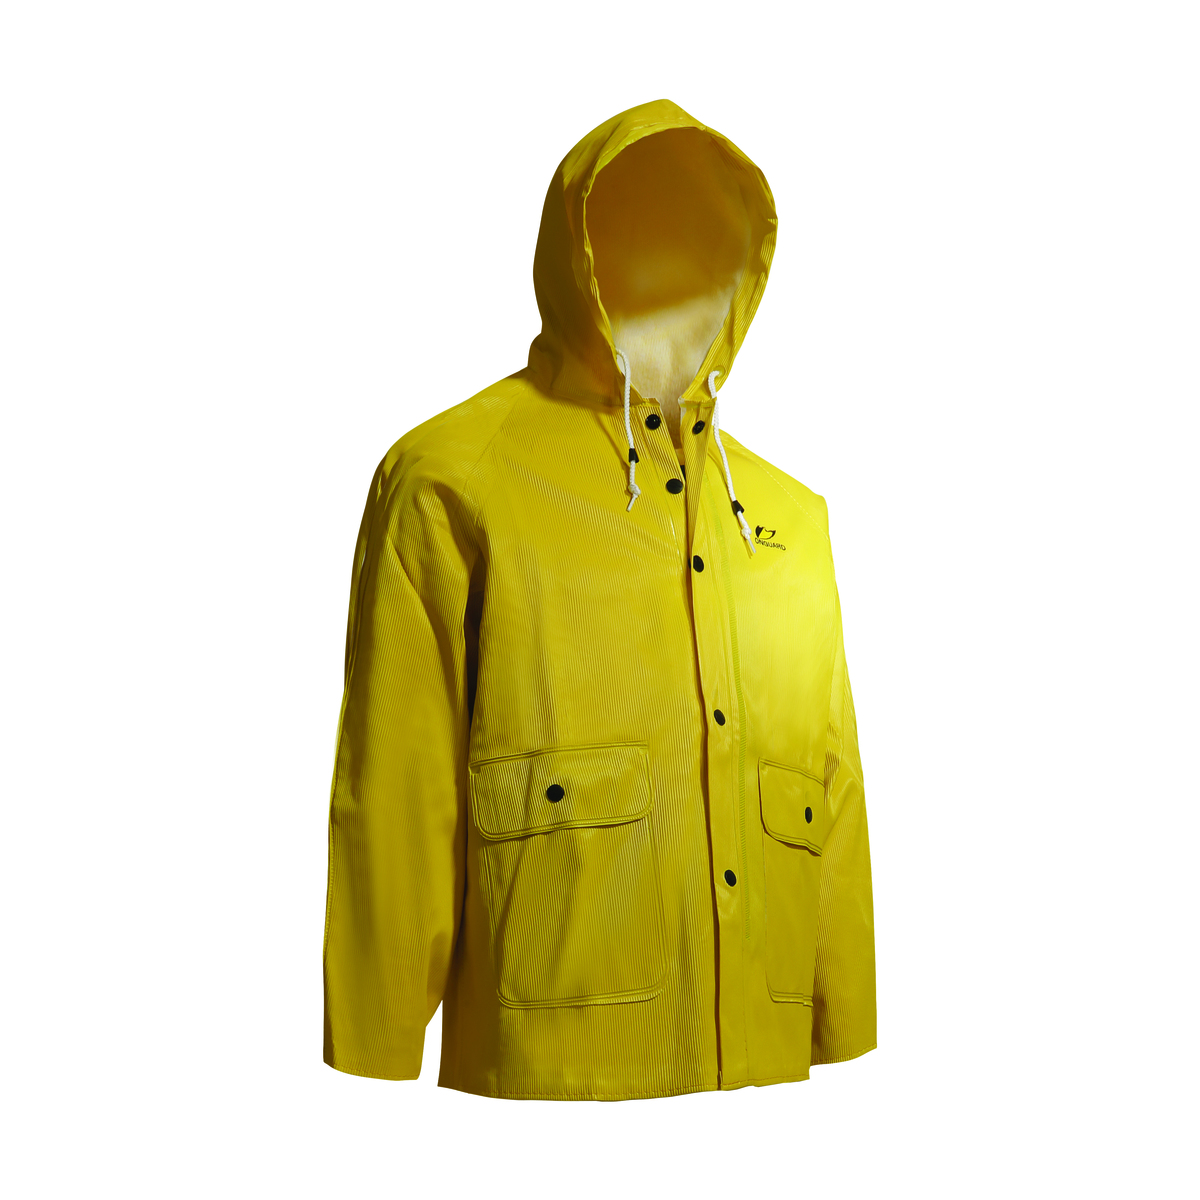 Dunlop® Protective Footwear 3X Yellow Webtex .65 mm Polyester/PVC Rain Jacket With Attached Hood